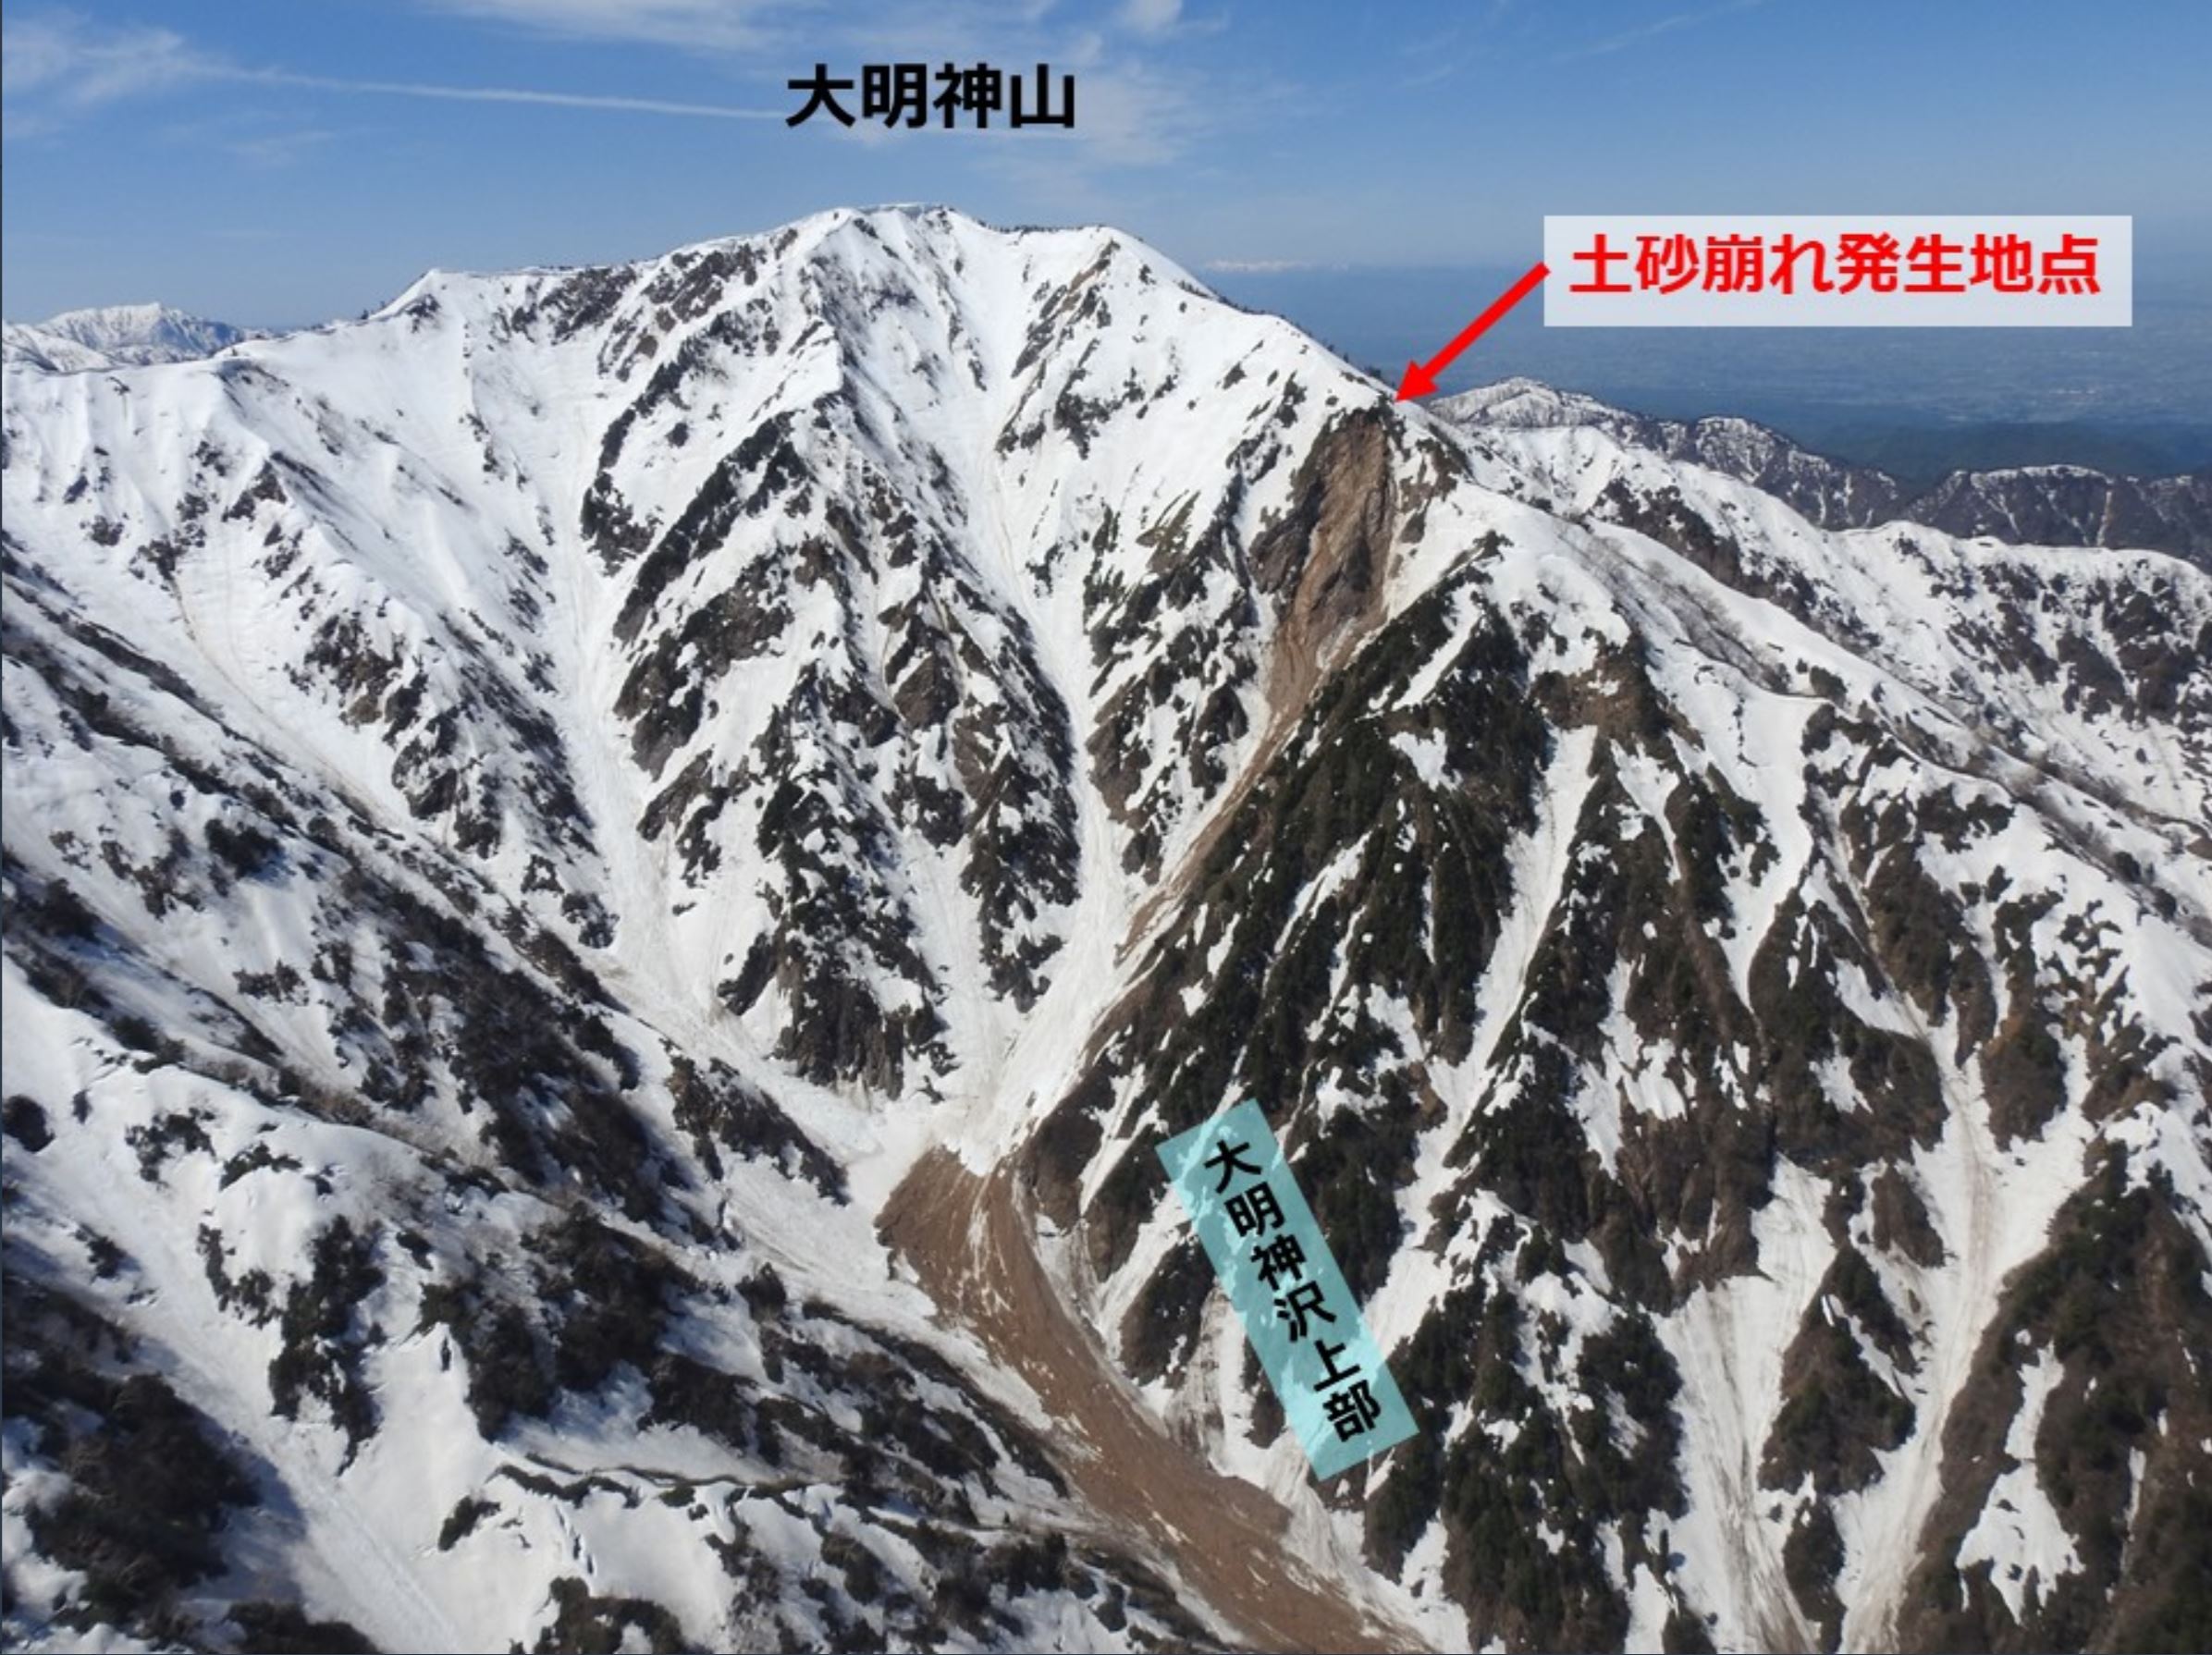 The aftermath of the rock slope collapse and rock avalanche on Mount Kekachi in Japan. Image tweeted by the Toyama Prefectural Police Mountain Guard.